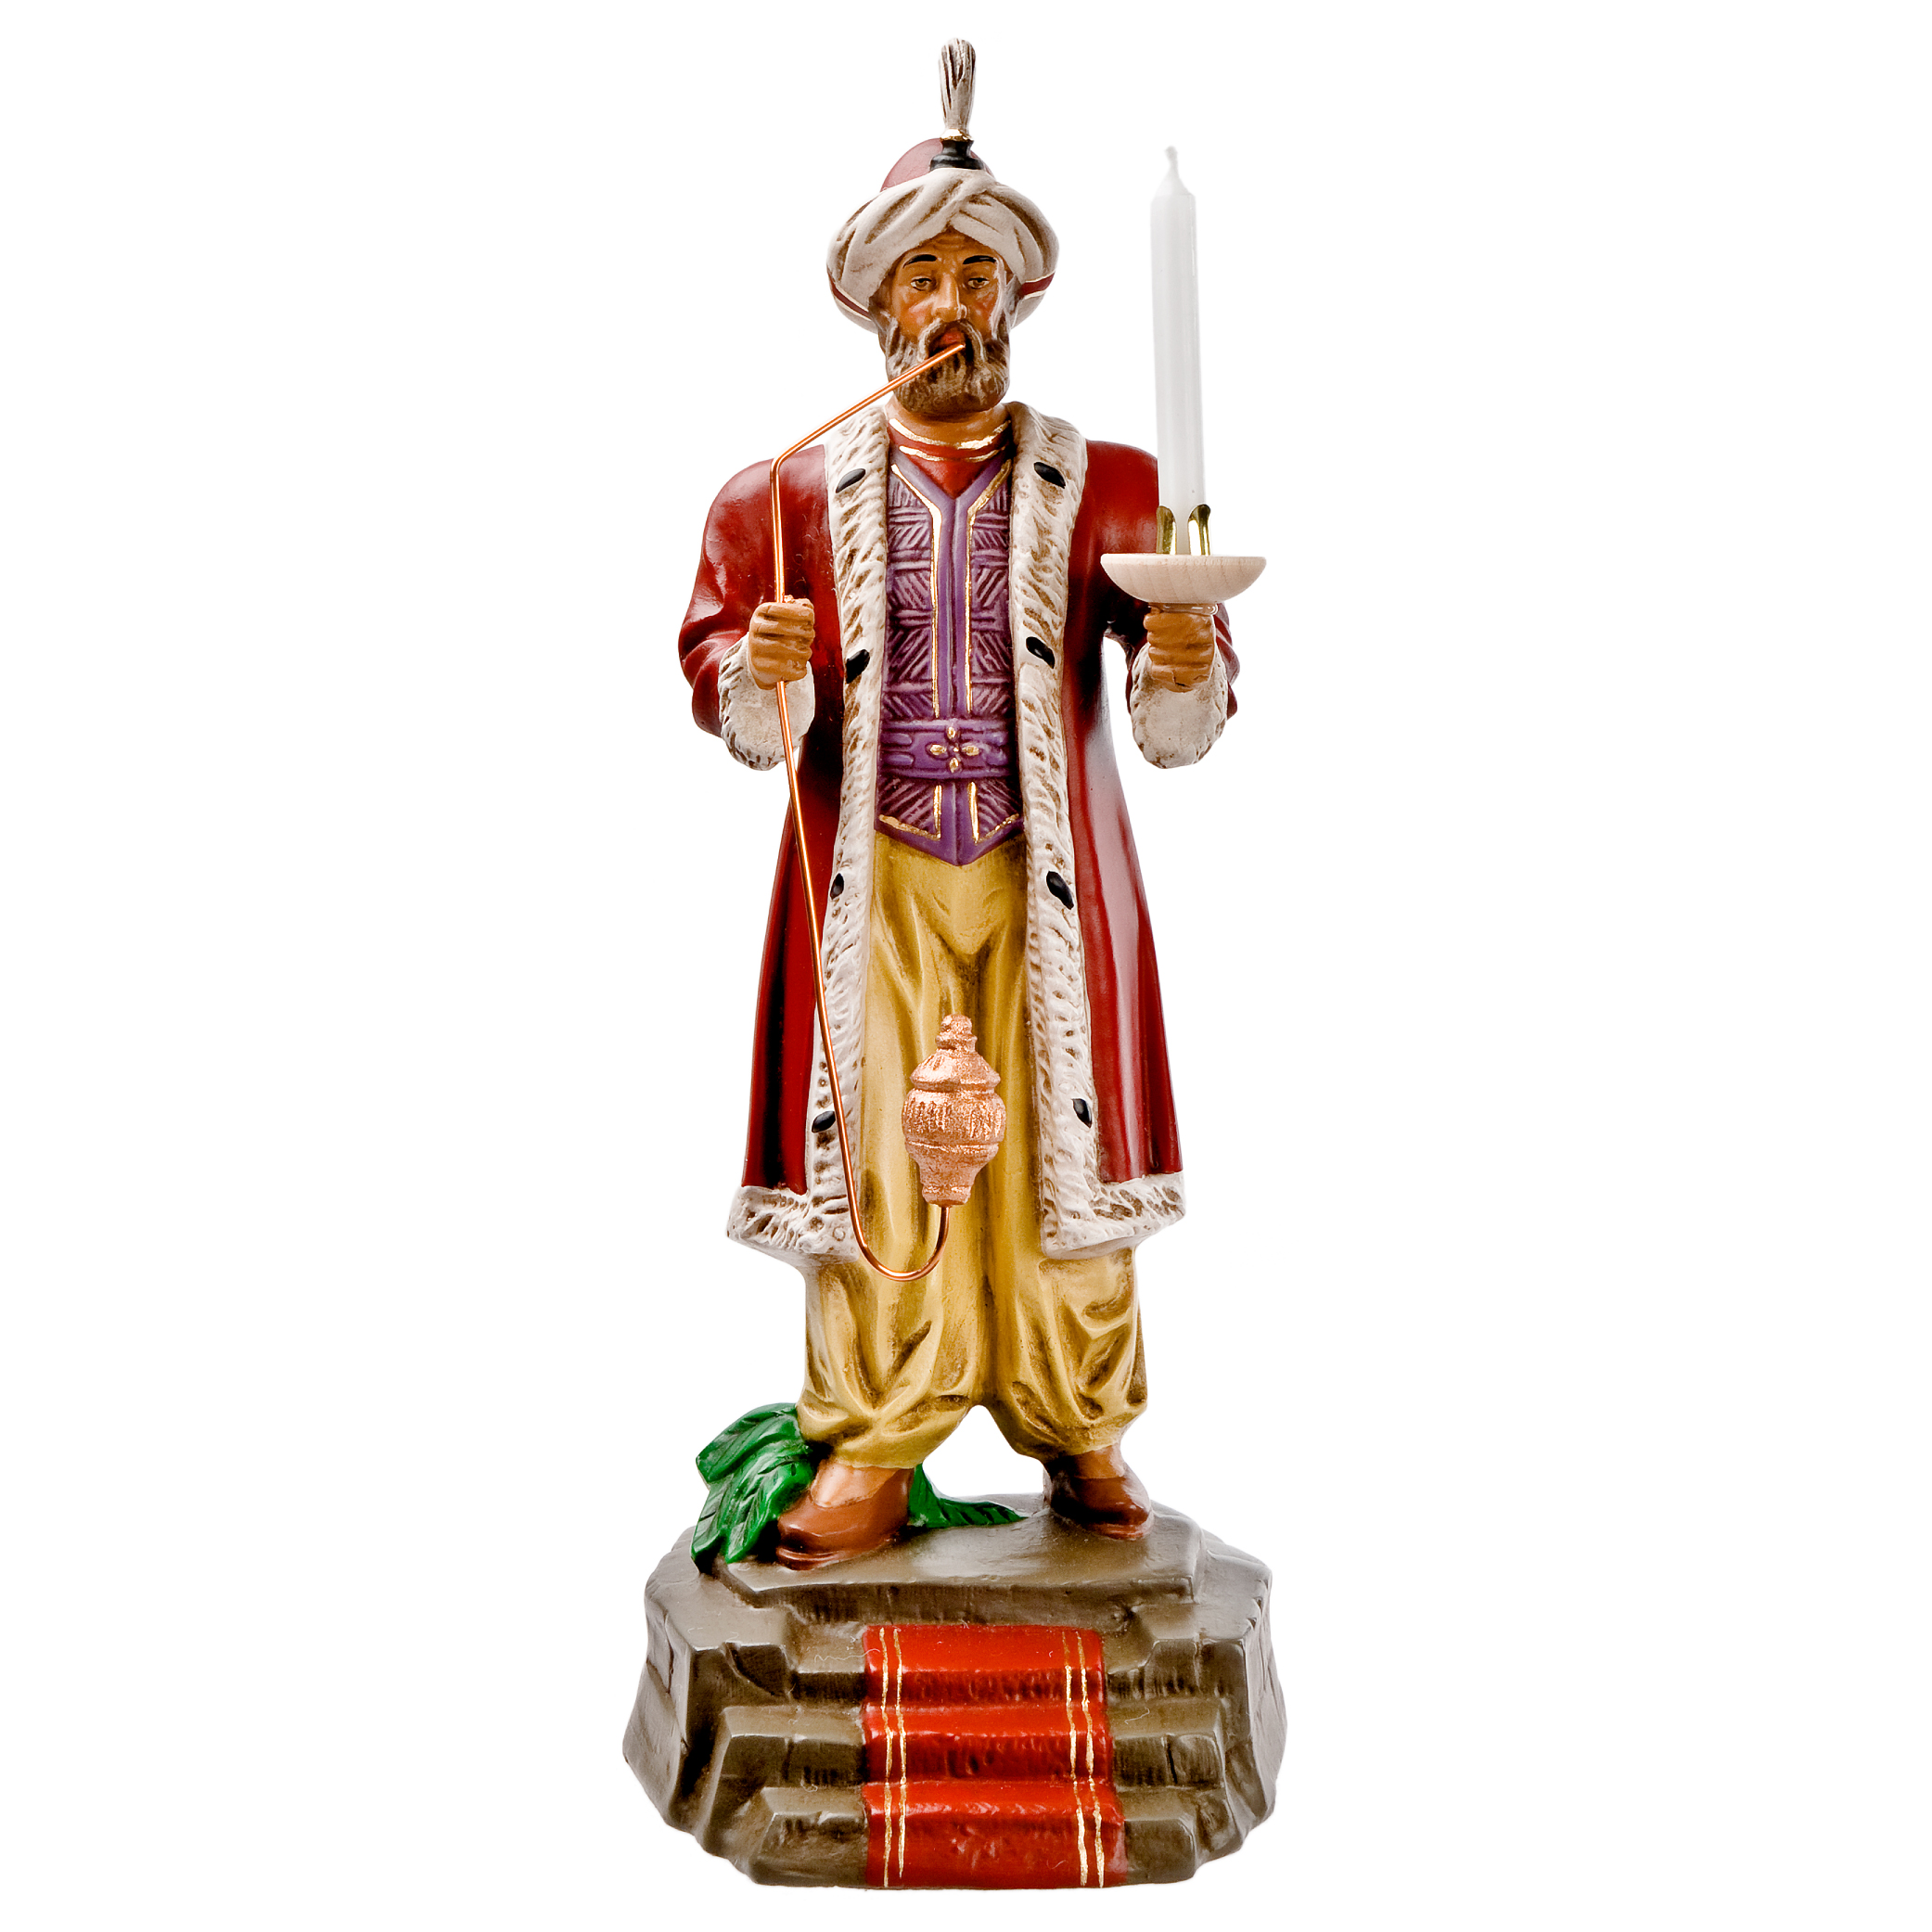 Turk with pipe and candle, Height: 11.75 inches